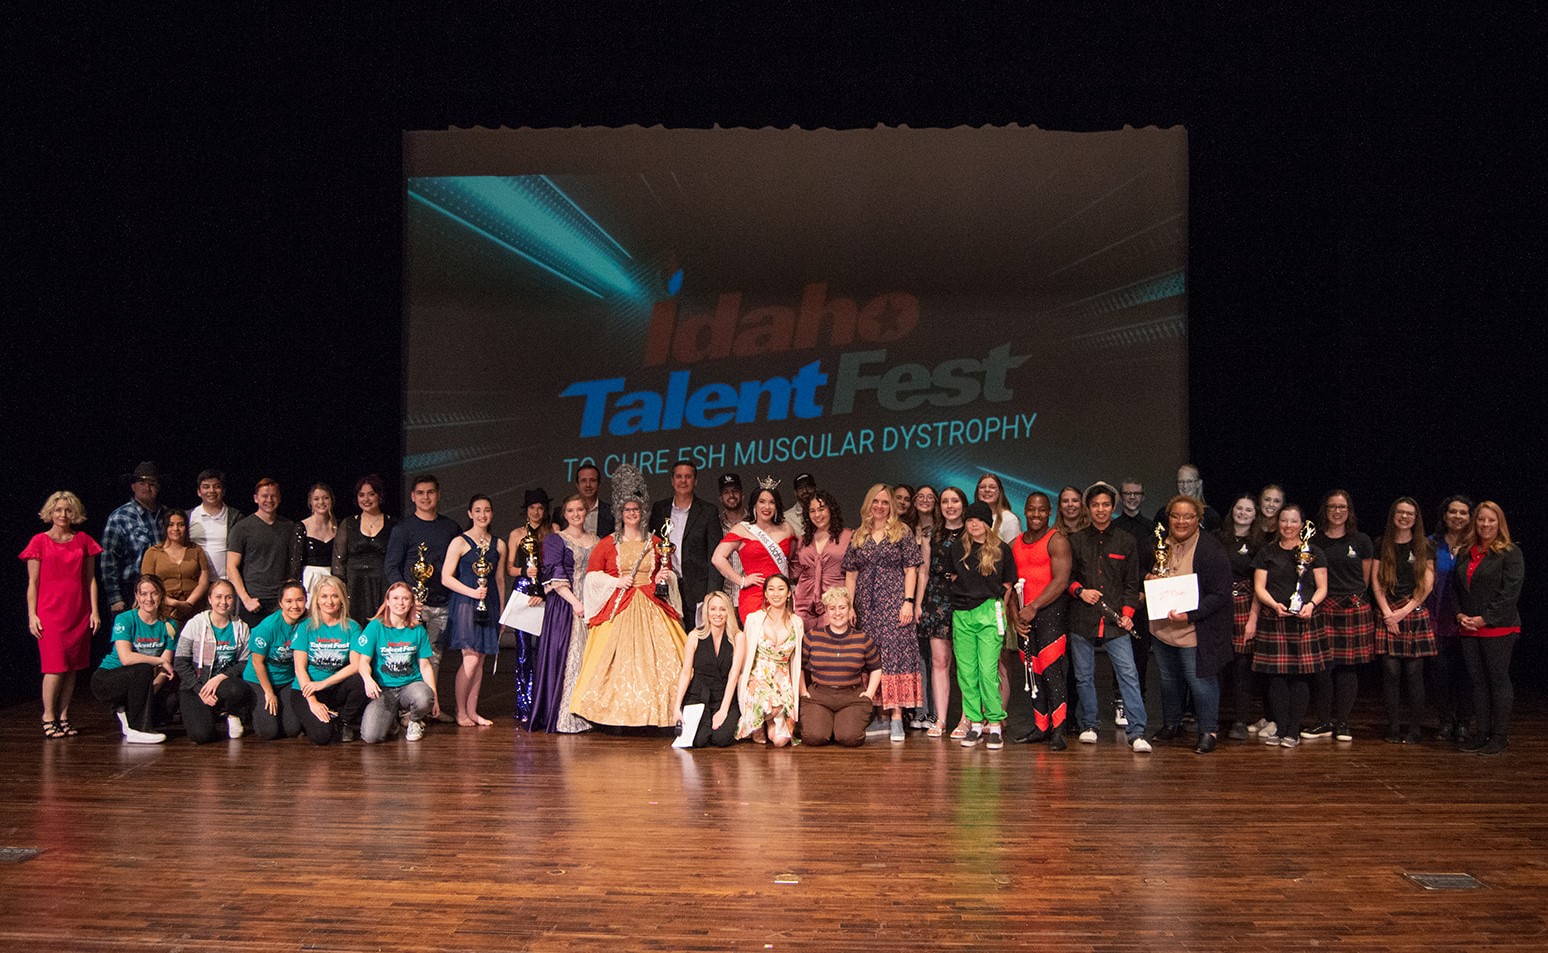 Group picture of the Idaho Talent Fest 2022